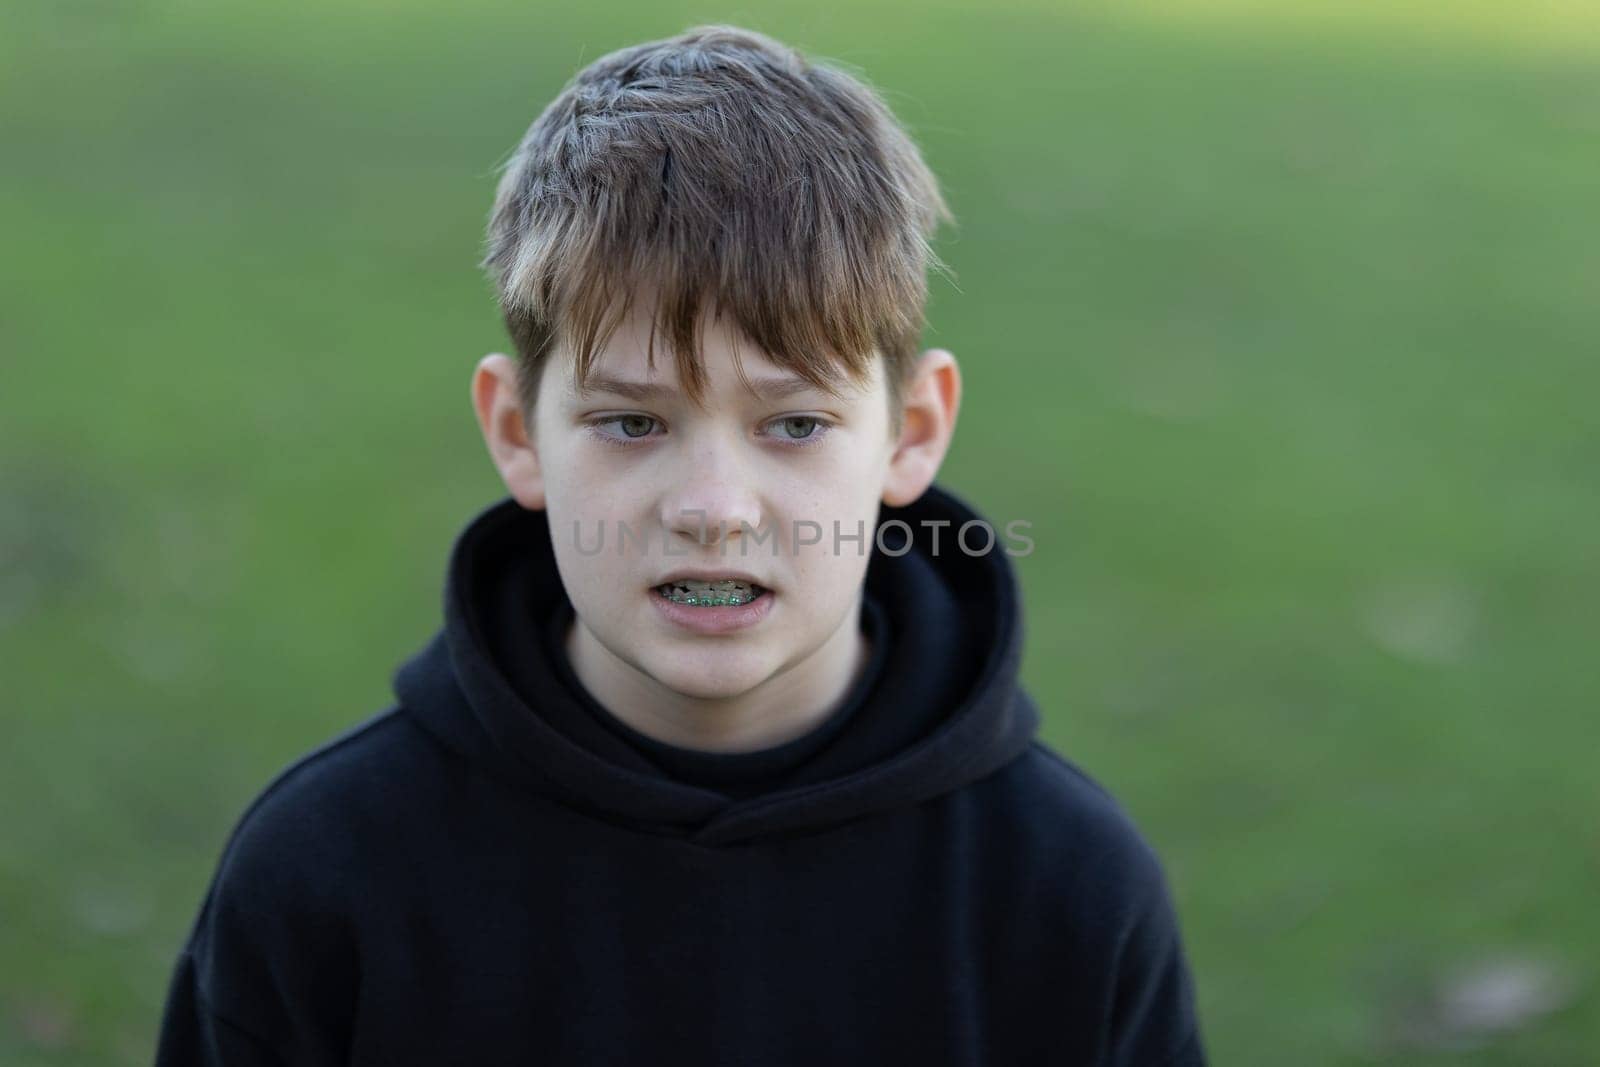 A boy with braces and a black hoodie is looking at the camera. Concept of discomfort and unease, as the boy's facial expression suggests that he is not happy or at ease